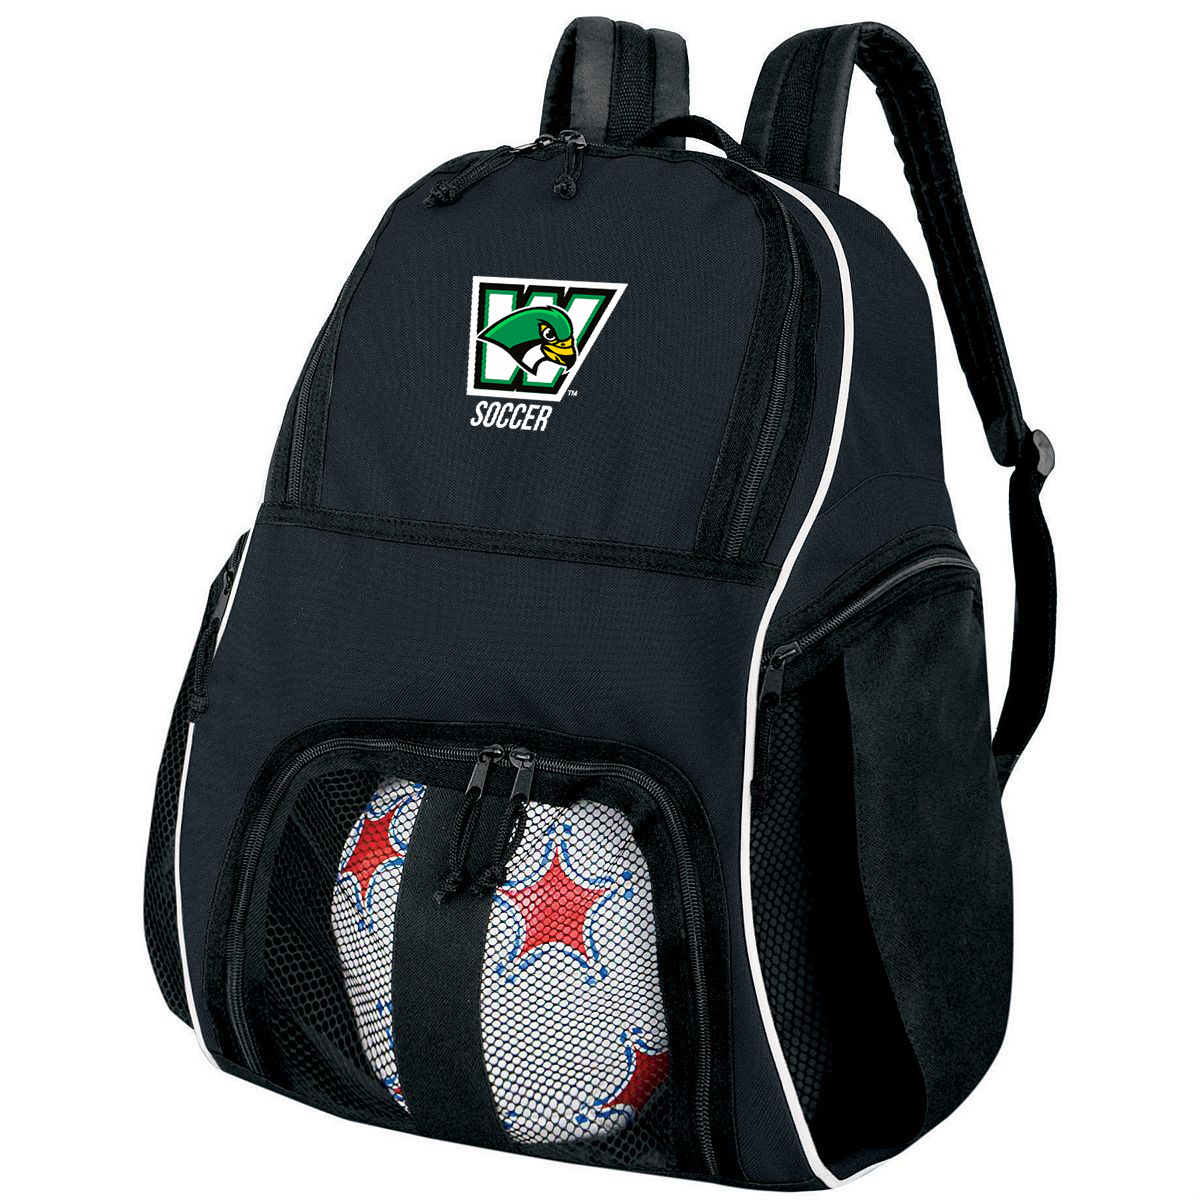 Woodland Falcons High School Soccer Player Backpack